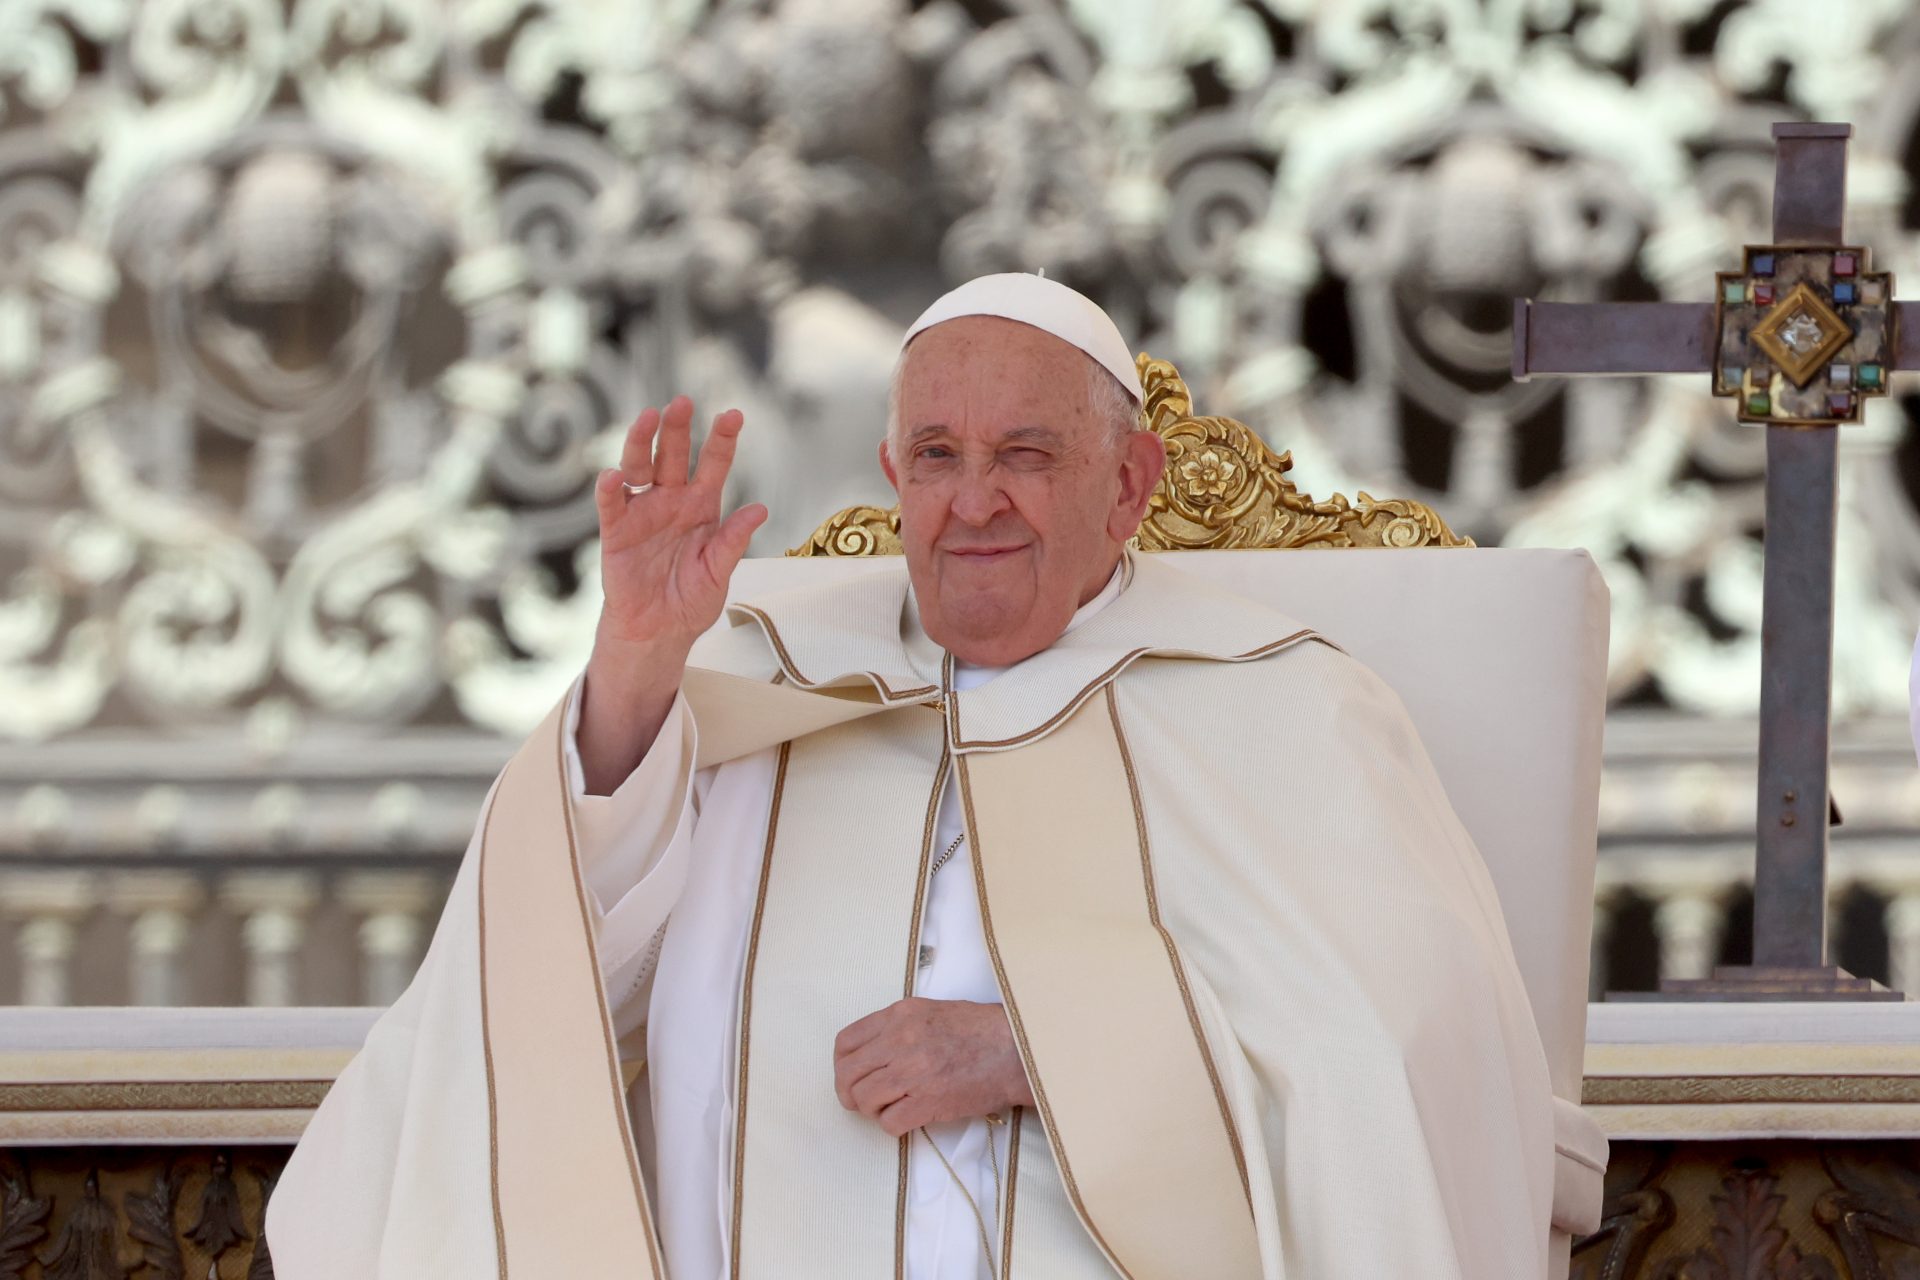 Pope Francis' comments raise questions about his support of the LGTBQ+ community